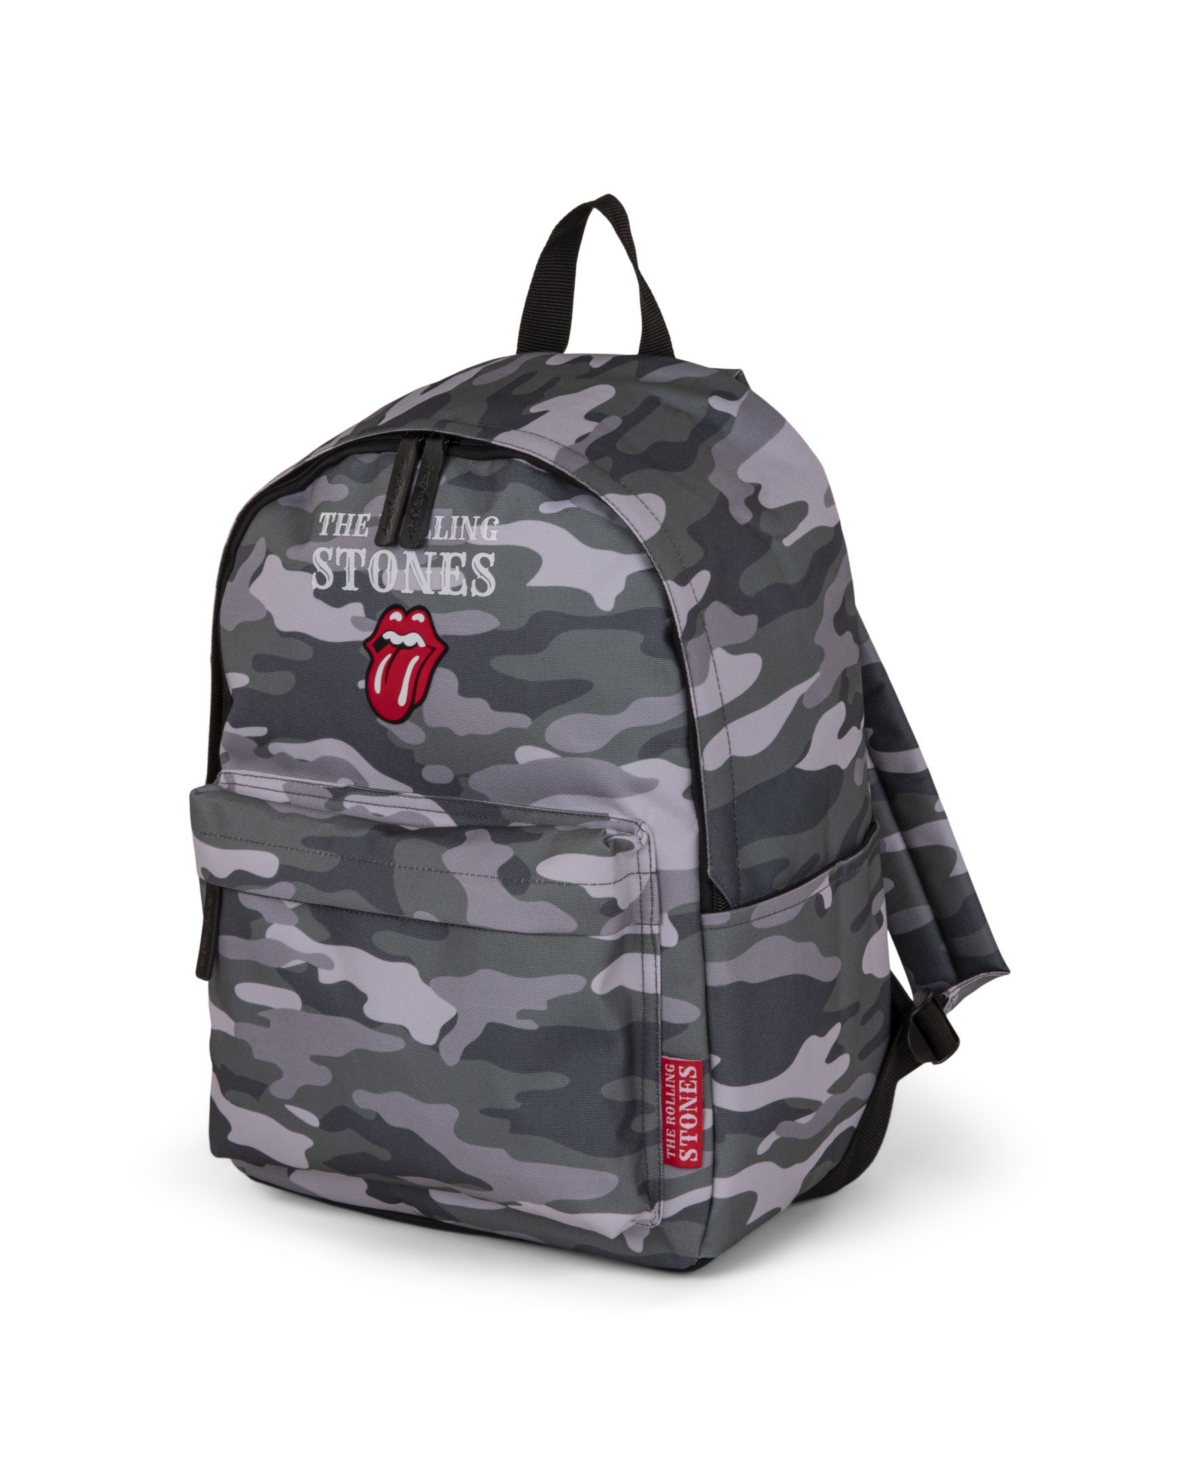 the Core Collection Backpack with Top Zippered Main Opening - Green Camo